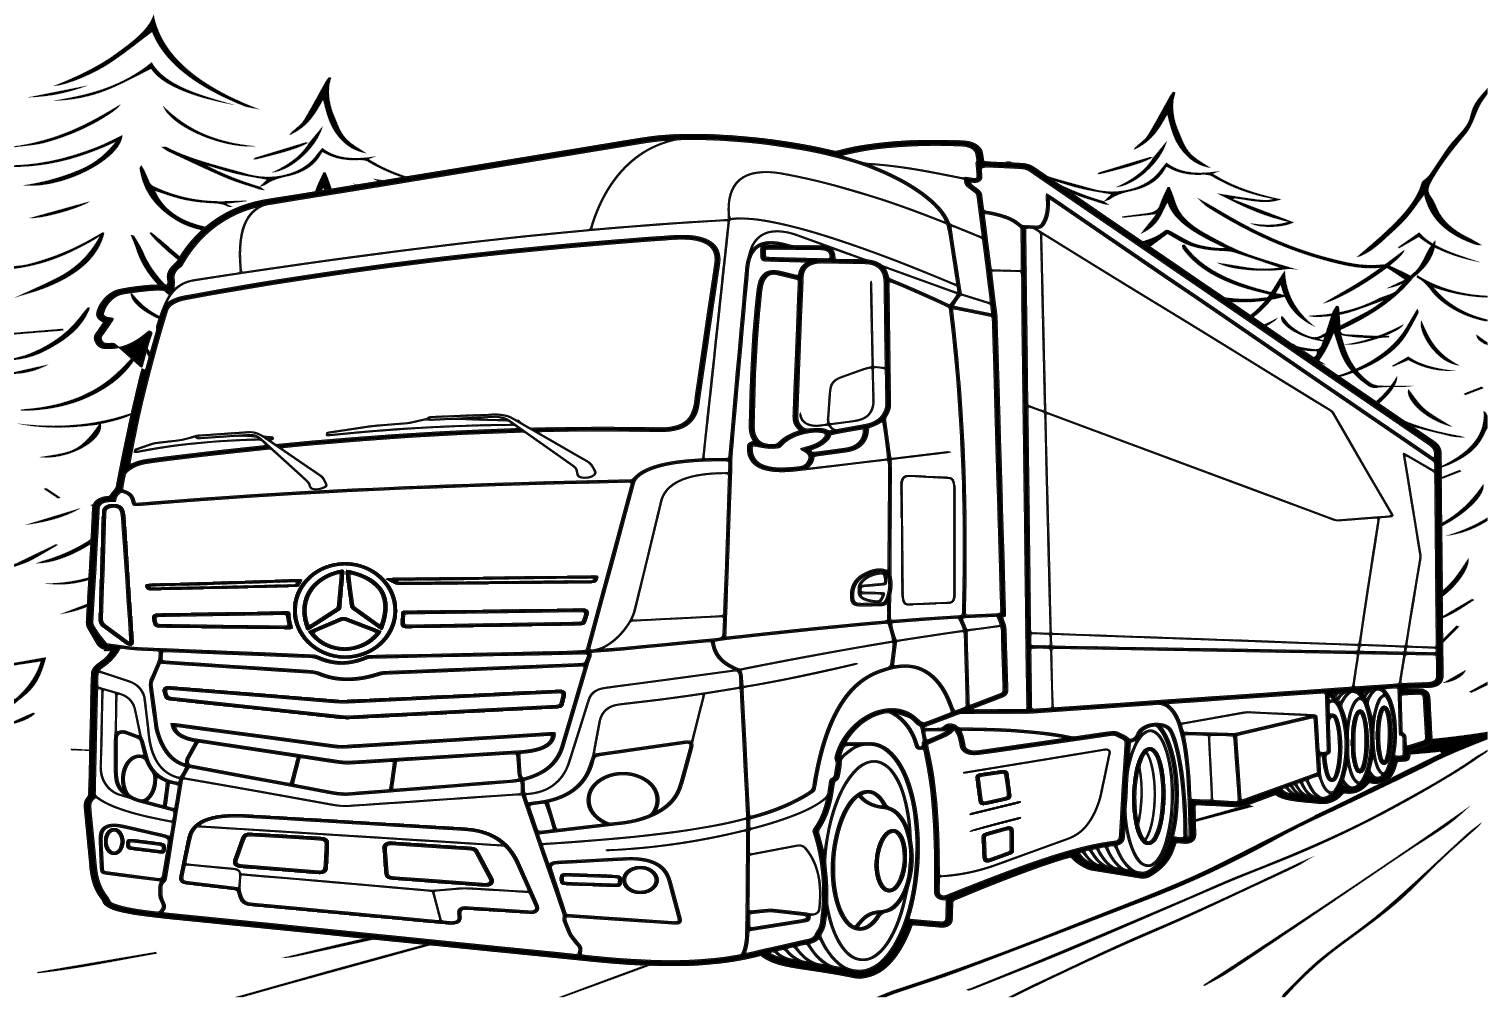 Truck Mercedes-Benz Actros Coloring Page from Mercedes-Benz